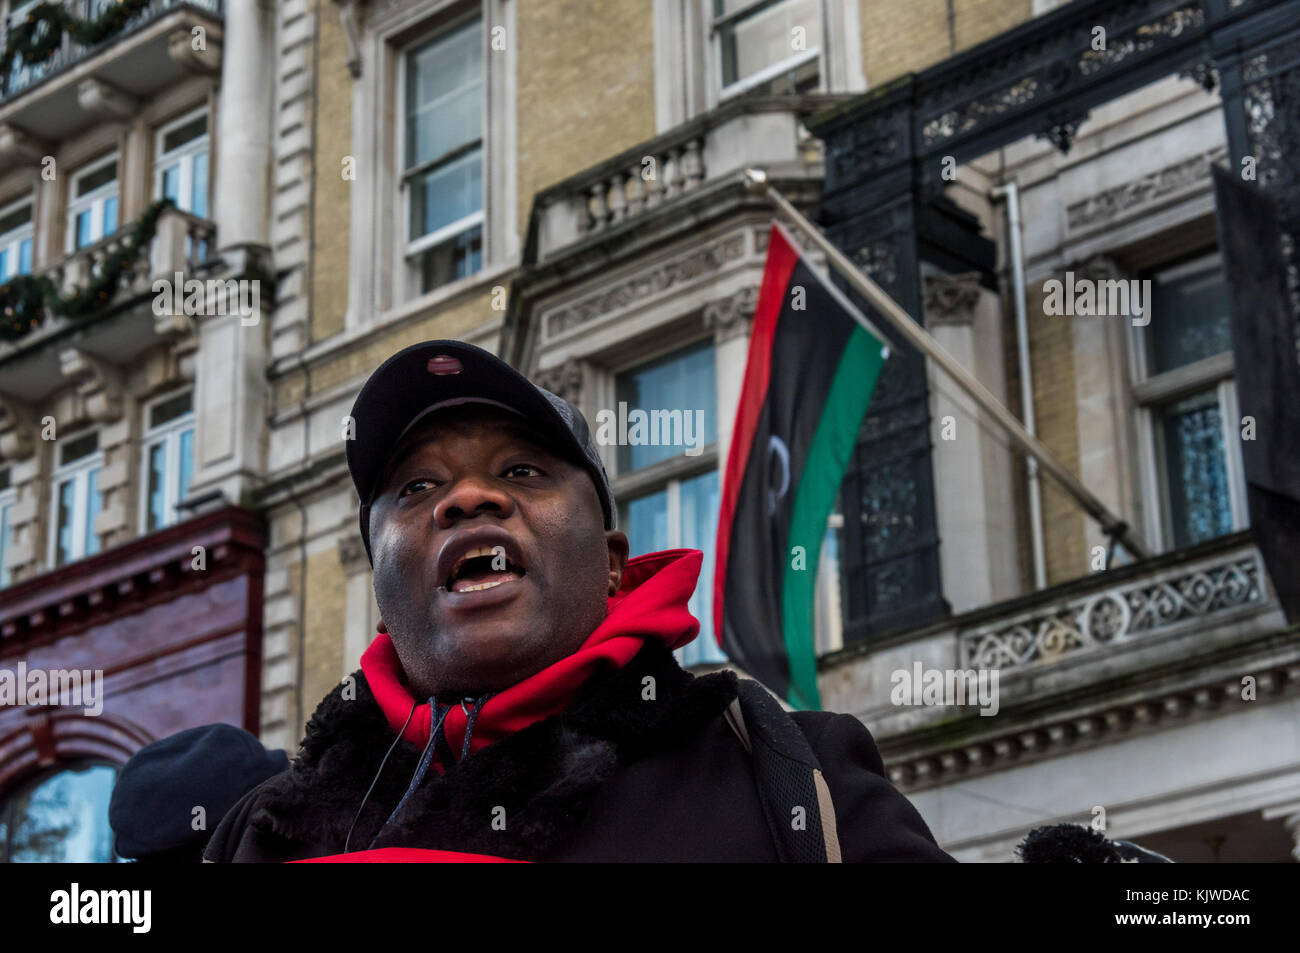 November 26, 2017 - London, UK. 26th November 2017. Glenroy Watson of the Global African Congress and RMT speaks at the protest outside the Libyan the Libyan Embassy calling on the Libyan Government to put an end to the slave sales of Africans there. The protest follows reports and videos since April this year showing the appalling auctions taking place there where Black African migrant are being sold as slaves. The clamp down on migration across the Mediterranean by the EU authorities working with Libya, with migrant boats being intercepted and towed back to Libya has resulted in inhumane c Stock Photo